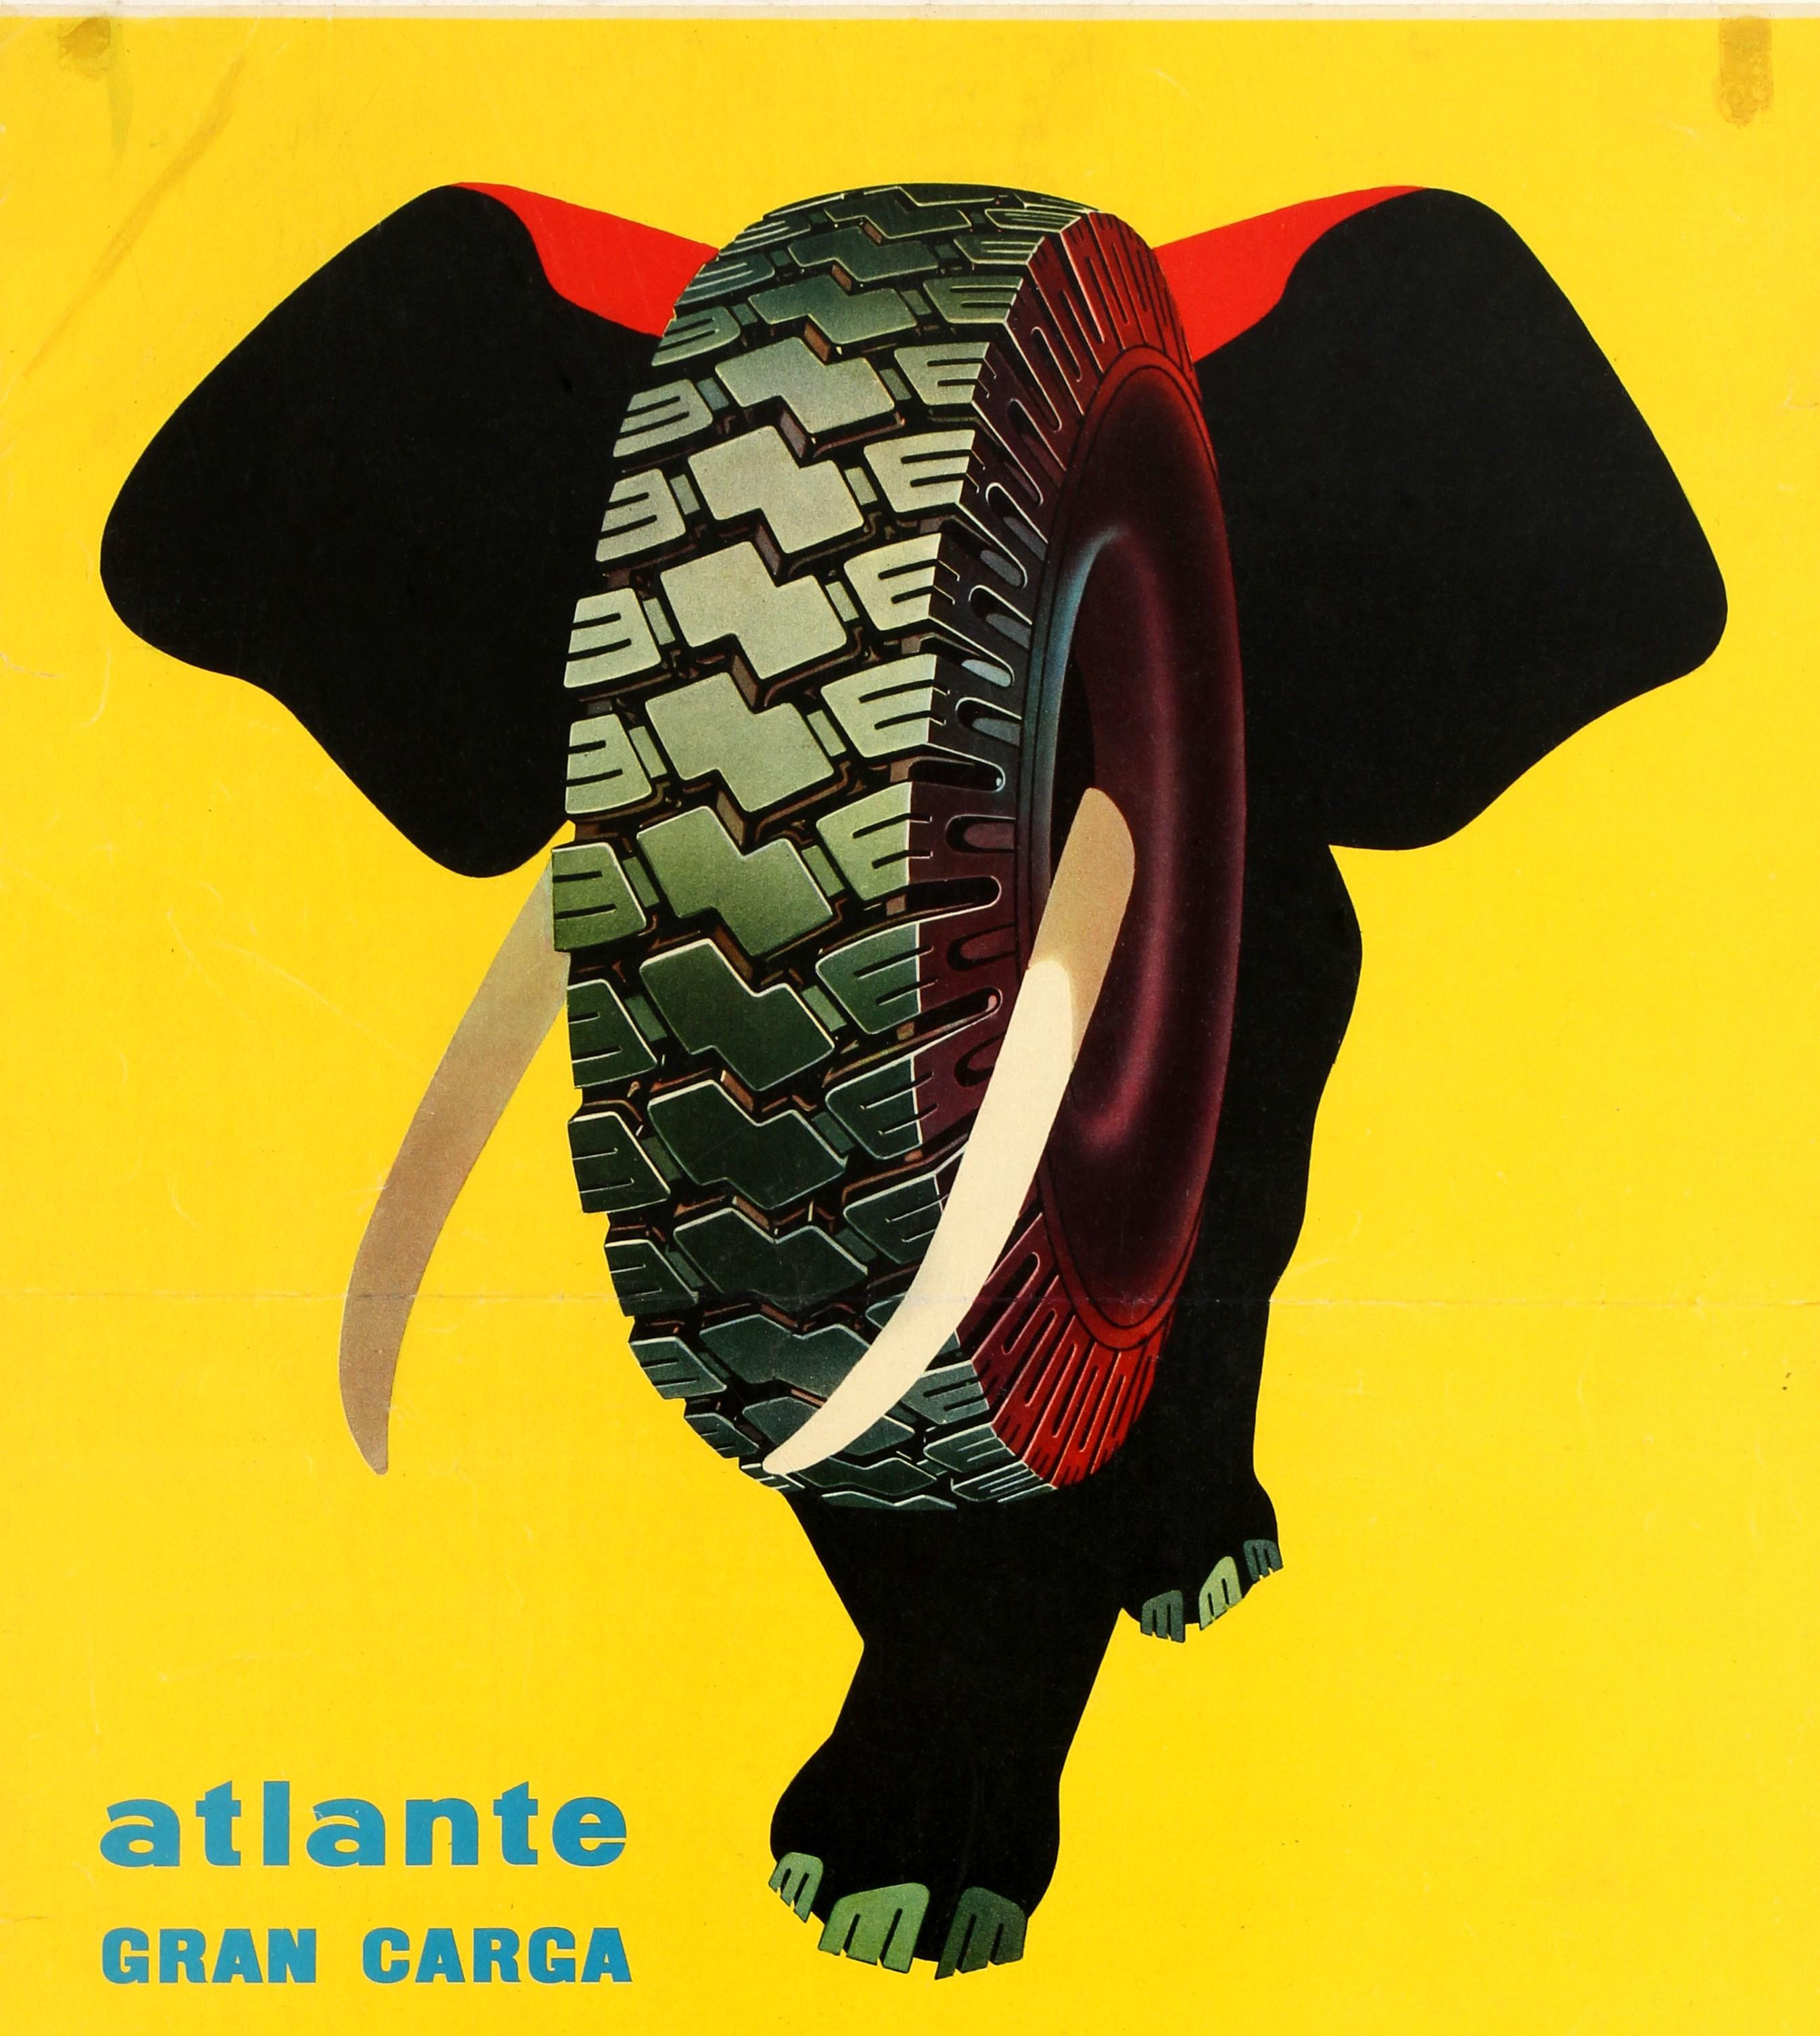 Original vintage tyre advertising poster - atlante Gran Carga Pirelli - featuring a striking illustration by the notable Italian graphic designer Armando Testa (1917-1912) of an elephant walking towards the viewer with its tusks coming out from a